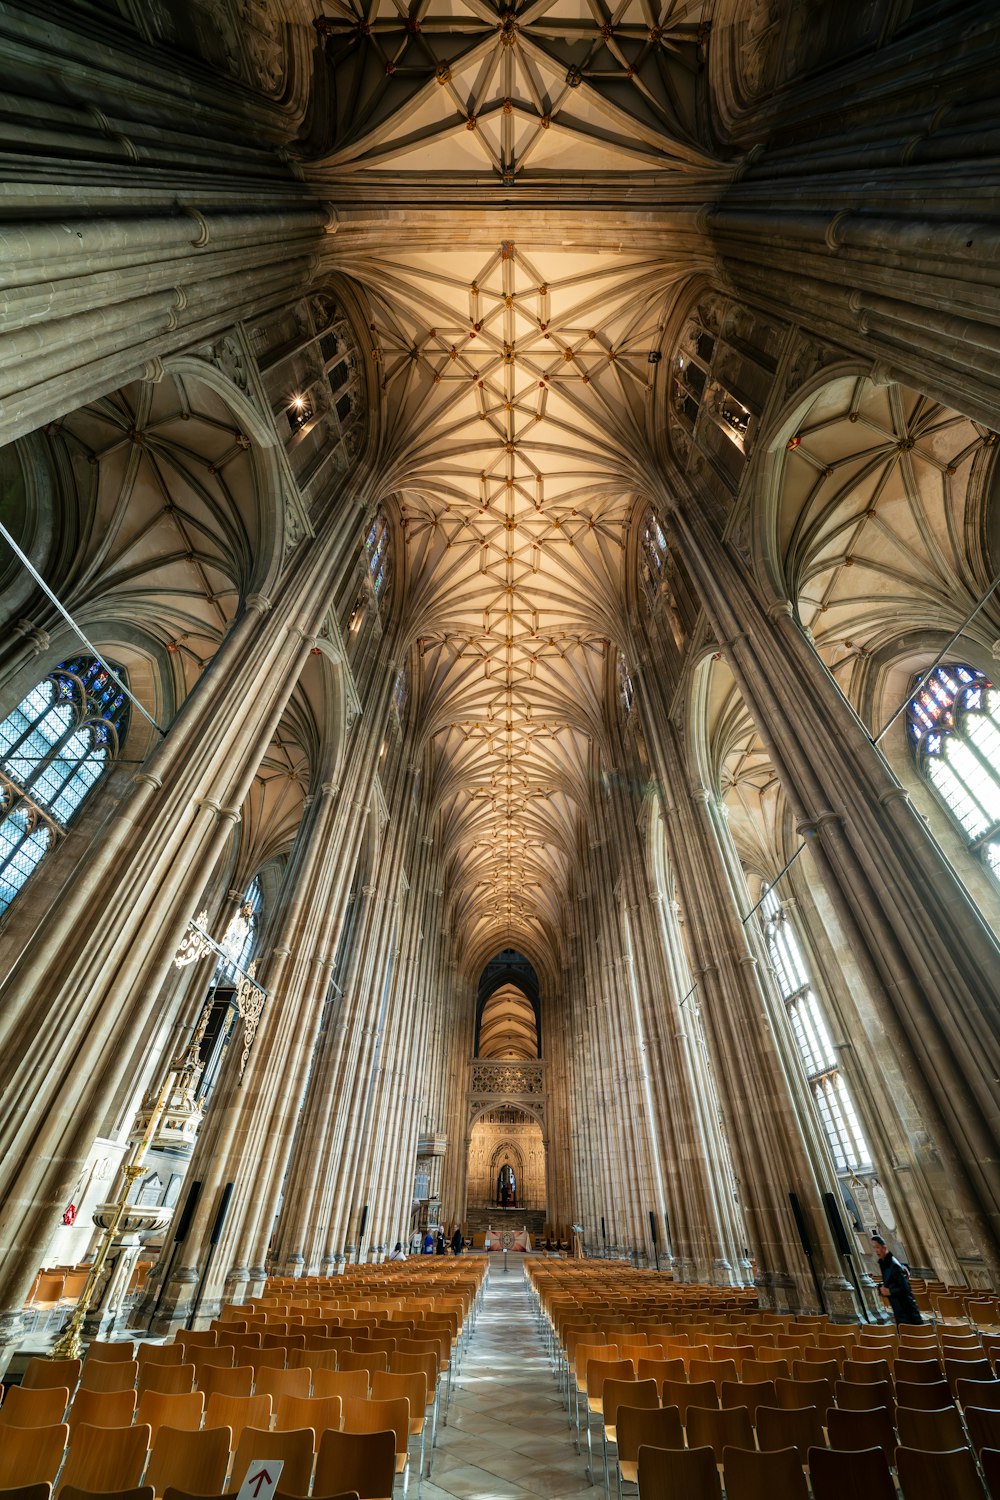 the interior of a large cathedral with vaulted ceilings